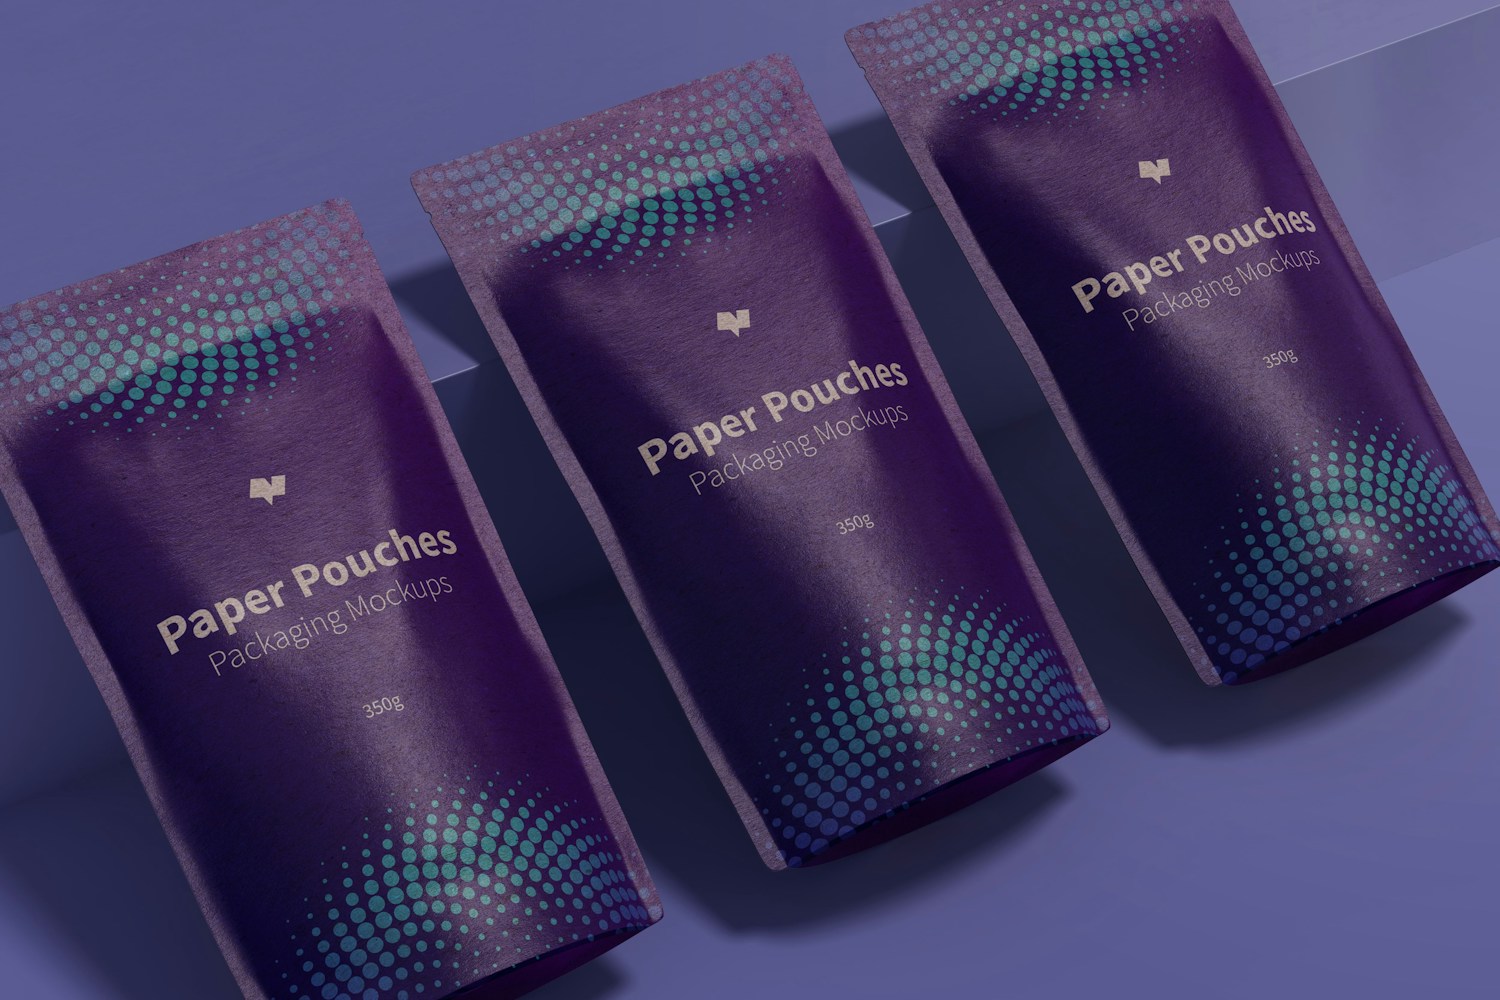 Paper Pouches Packaging Set Mockup